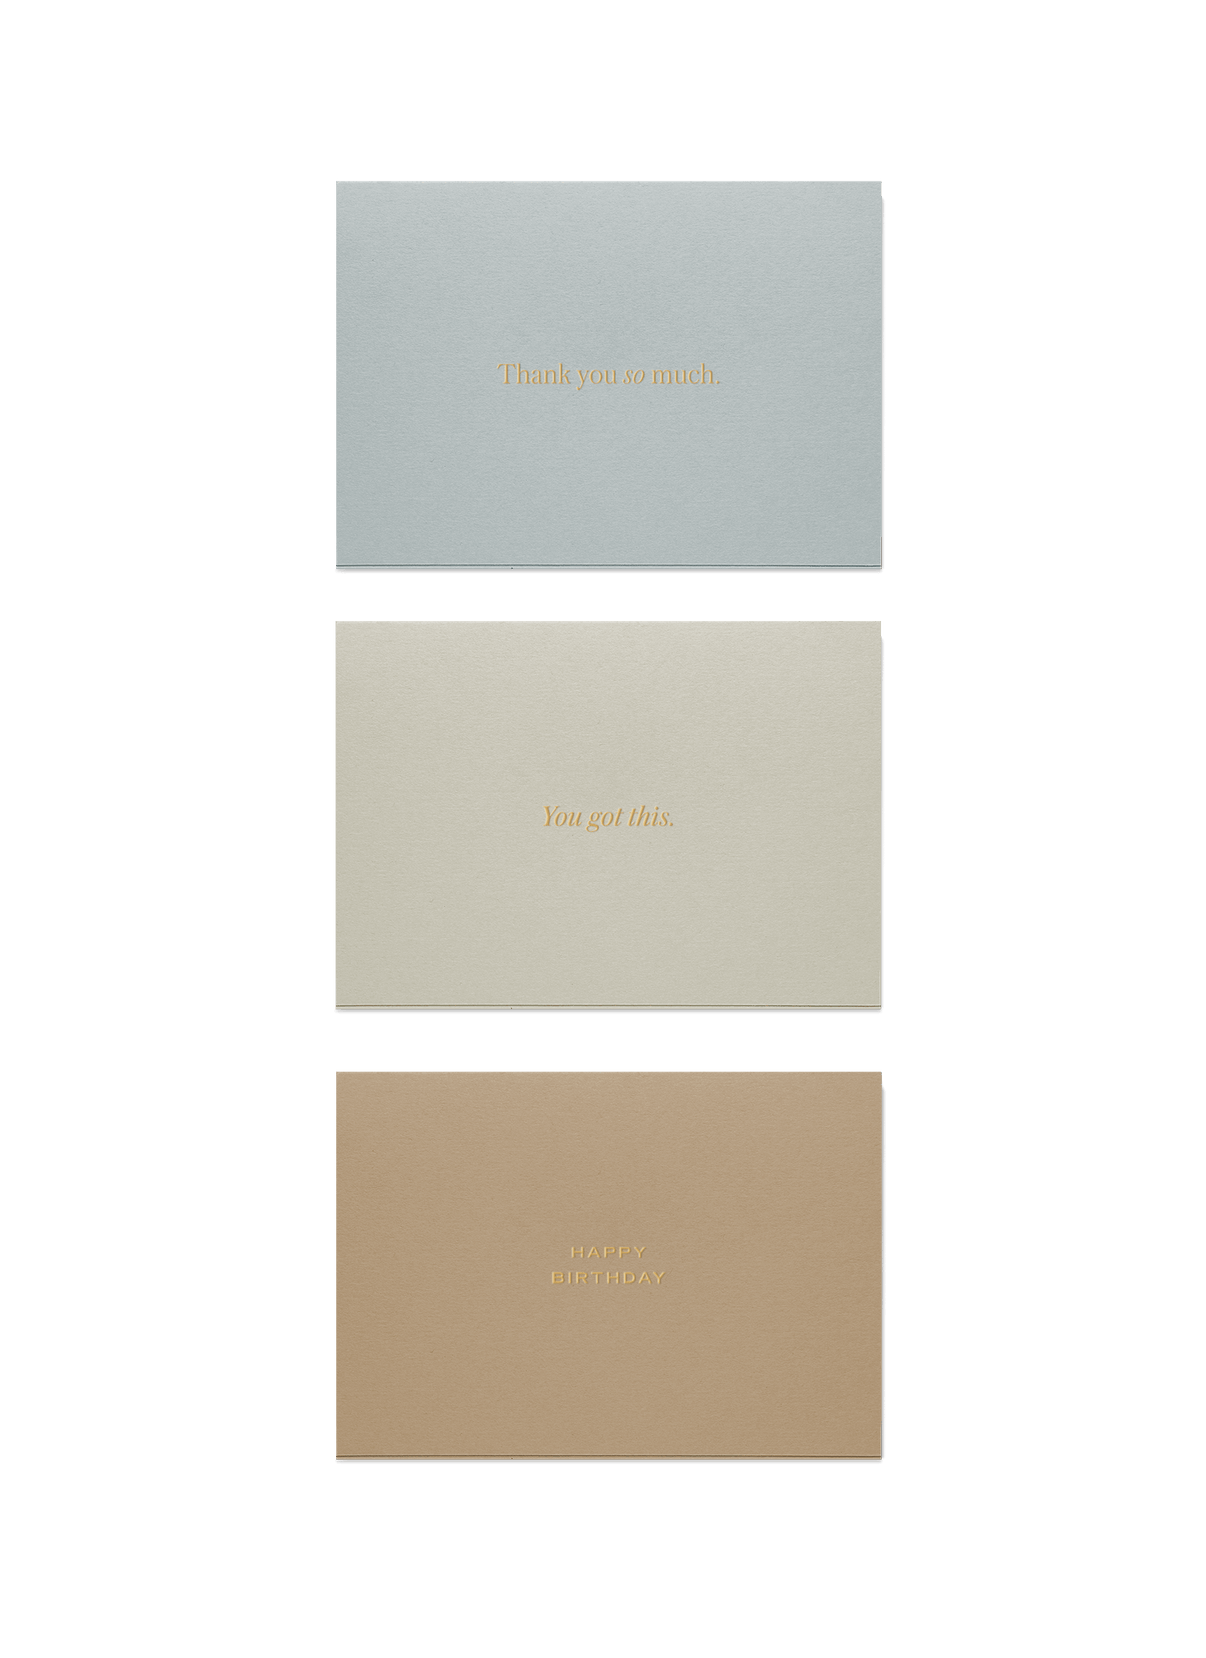 Assorted Card set with embossing and foil stamped details. 